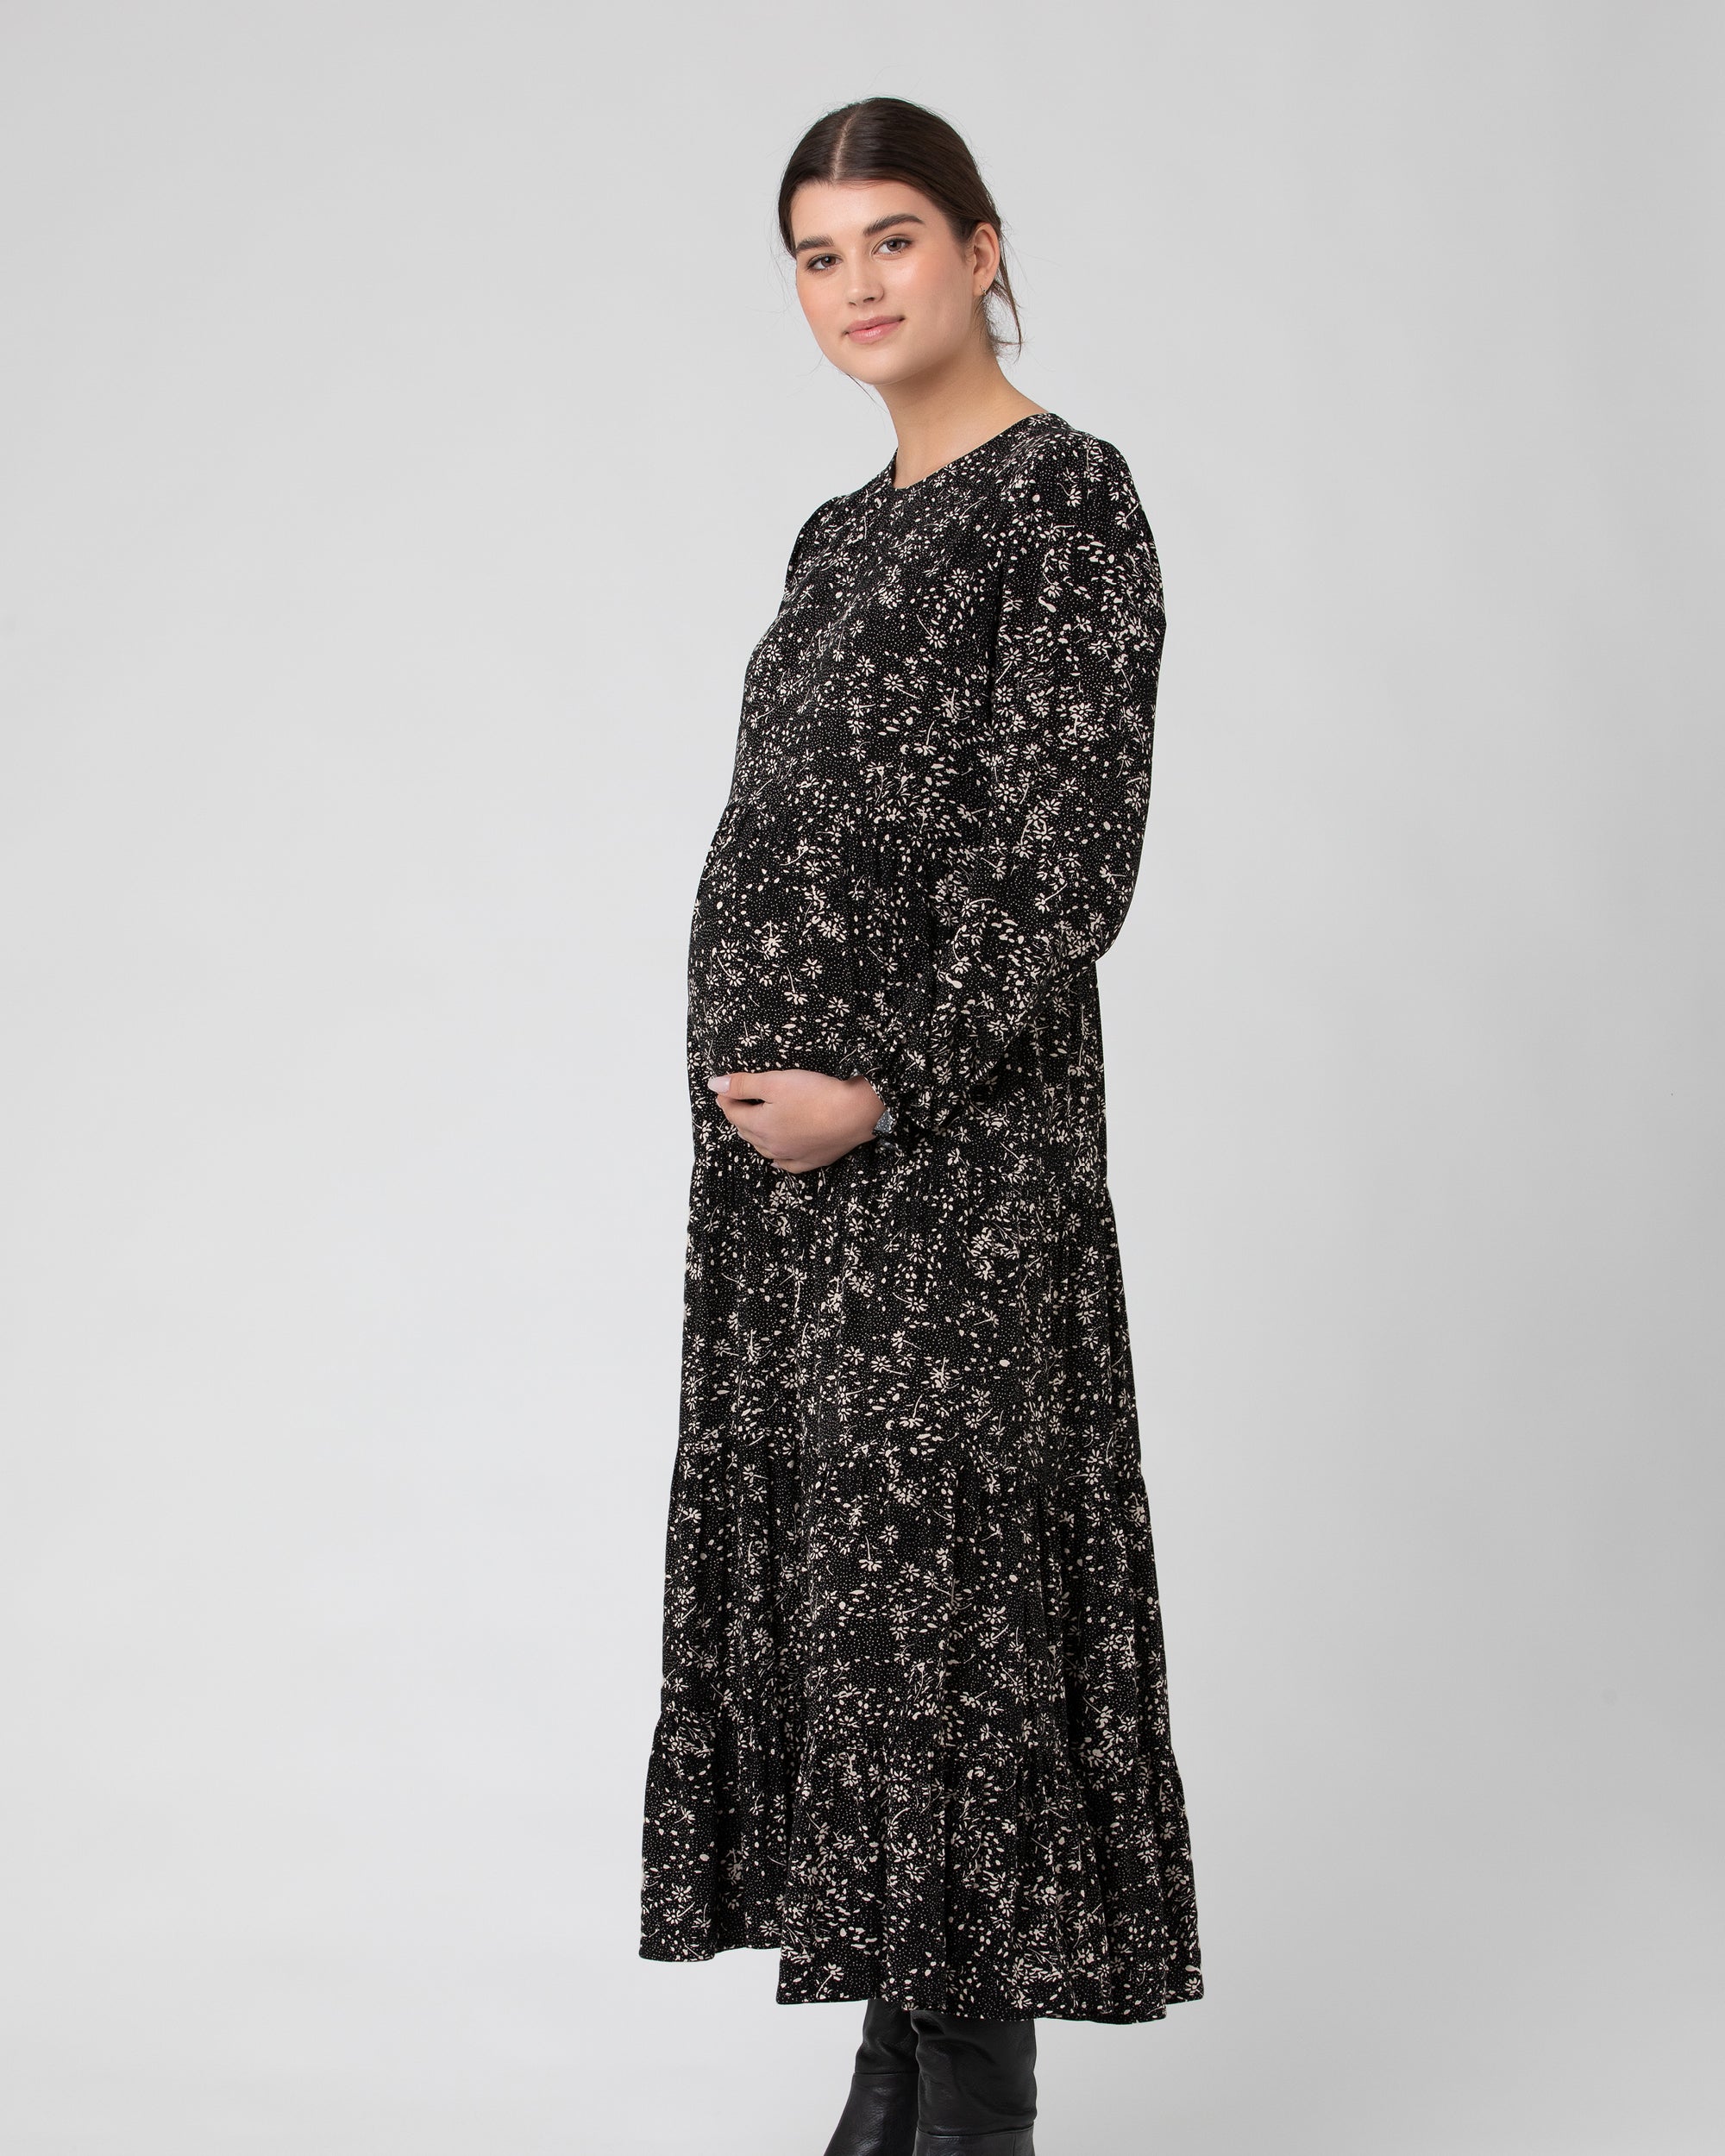 Trixie Tiered Dress  Black / Natural